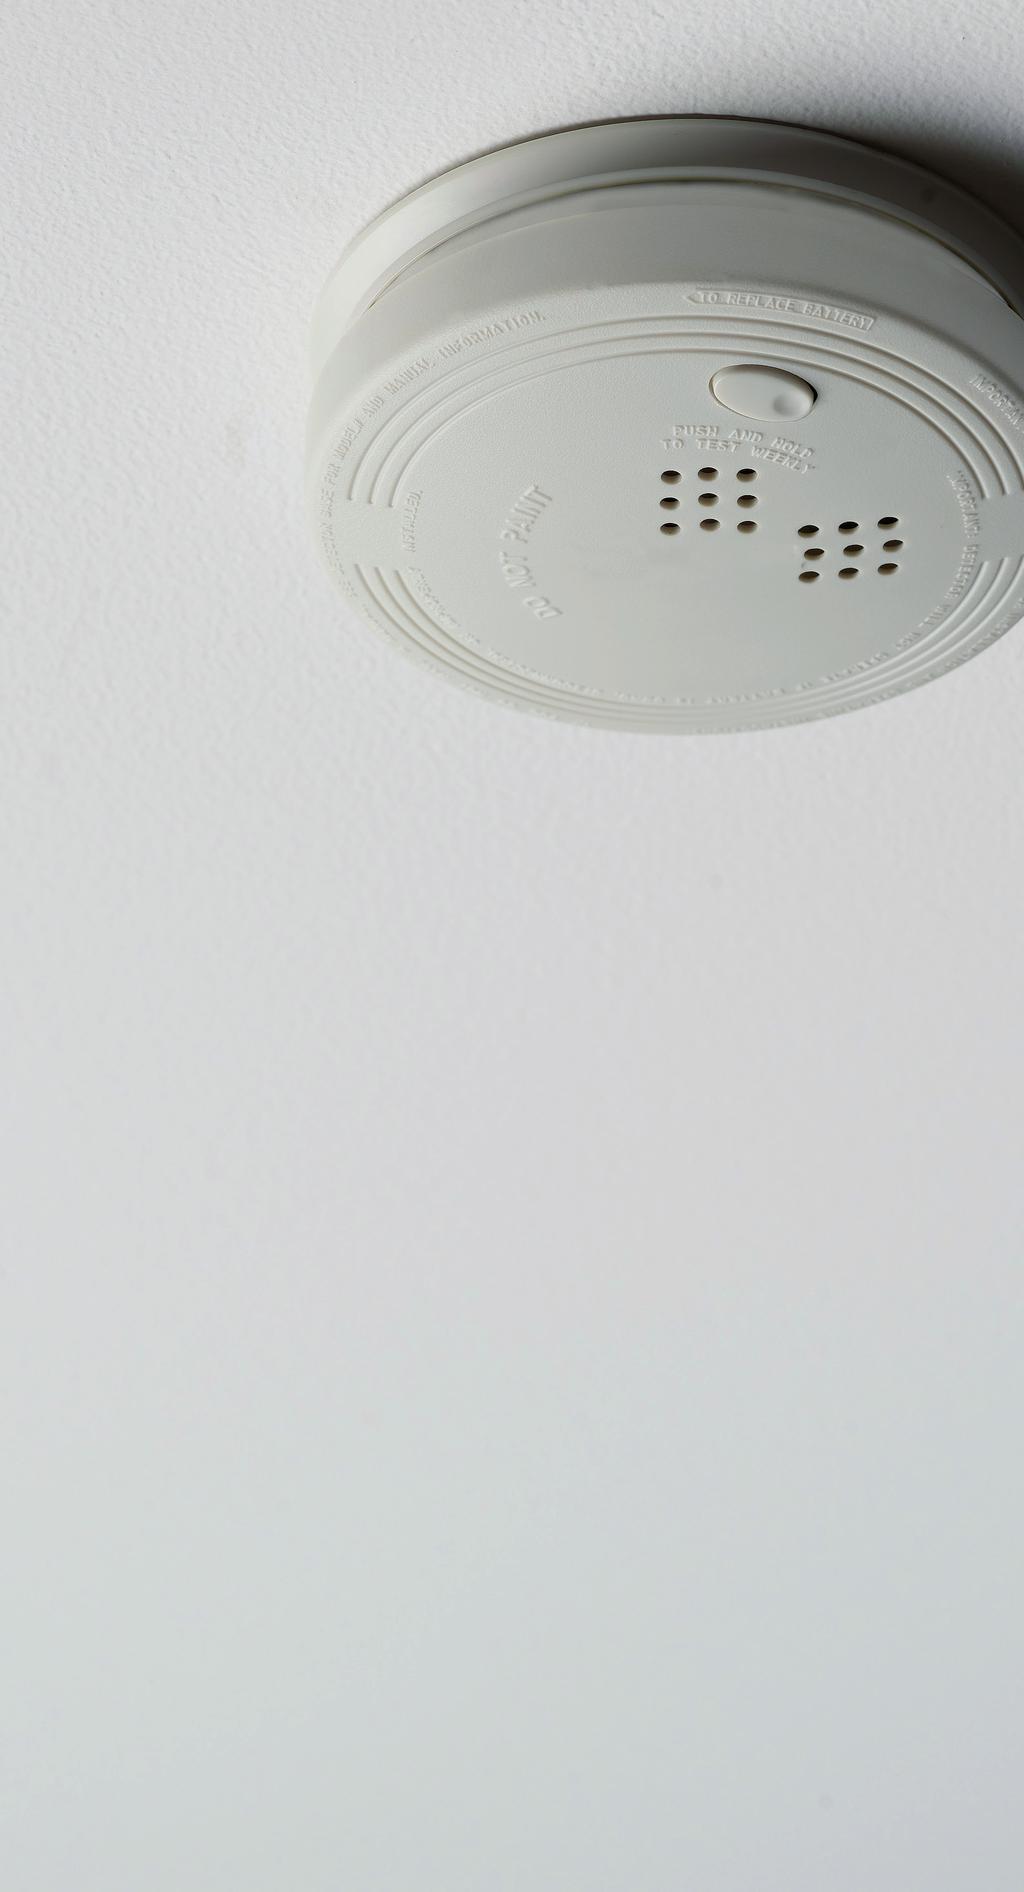 Smoke alarm facts If you don t have a working smoke alarm installed in your home, and a fire occurs: You are 57% more likely to suffer property loss and damage You are 26%